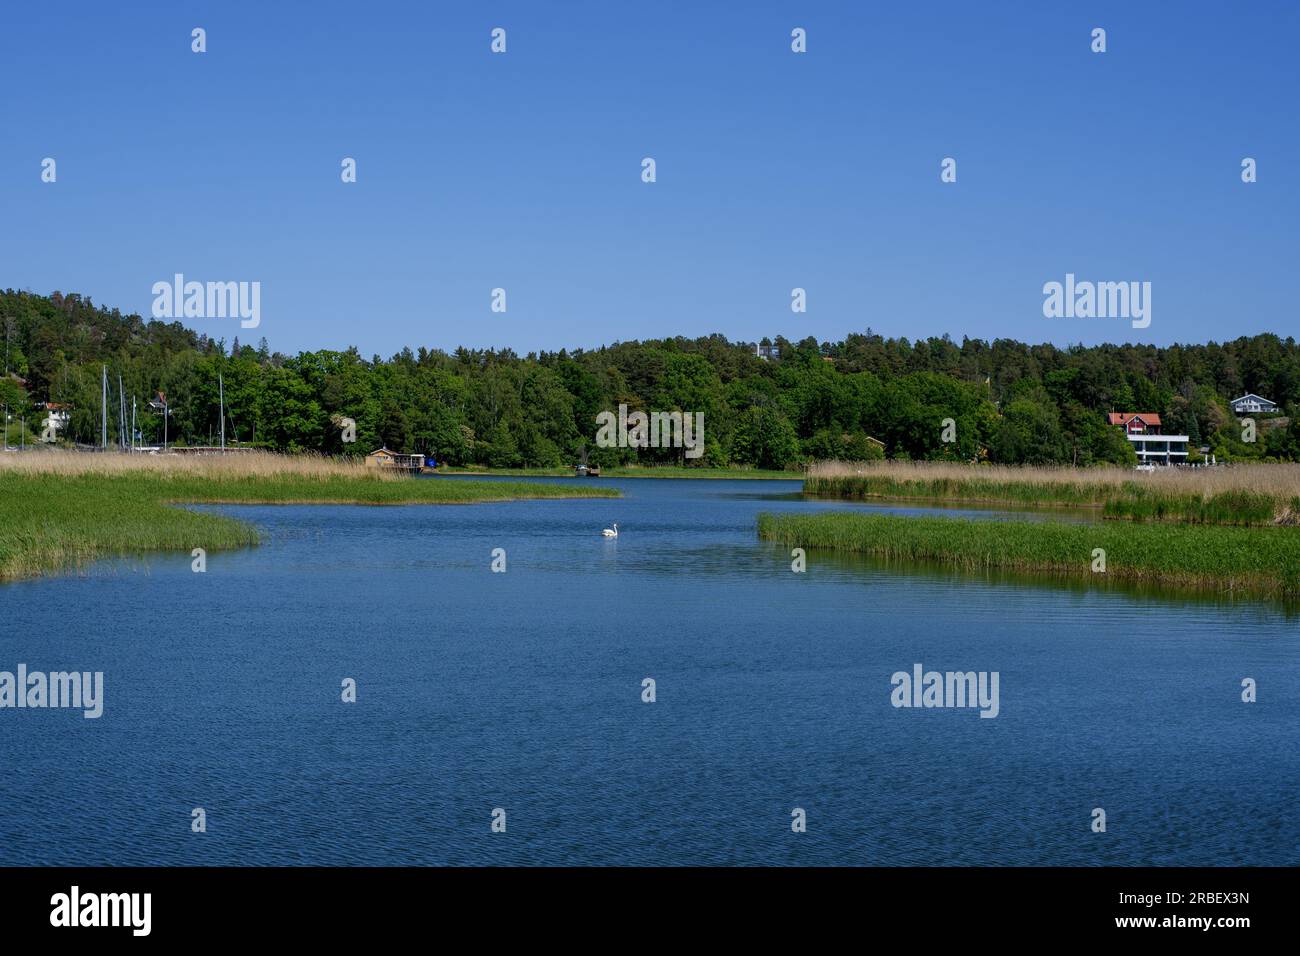 Lake of Sweden with swan in center and green trees in background. a lot of sedge along the shore of the lake. Stock Photo